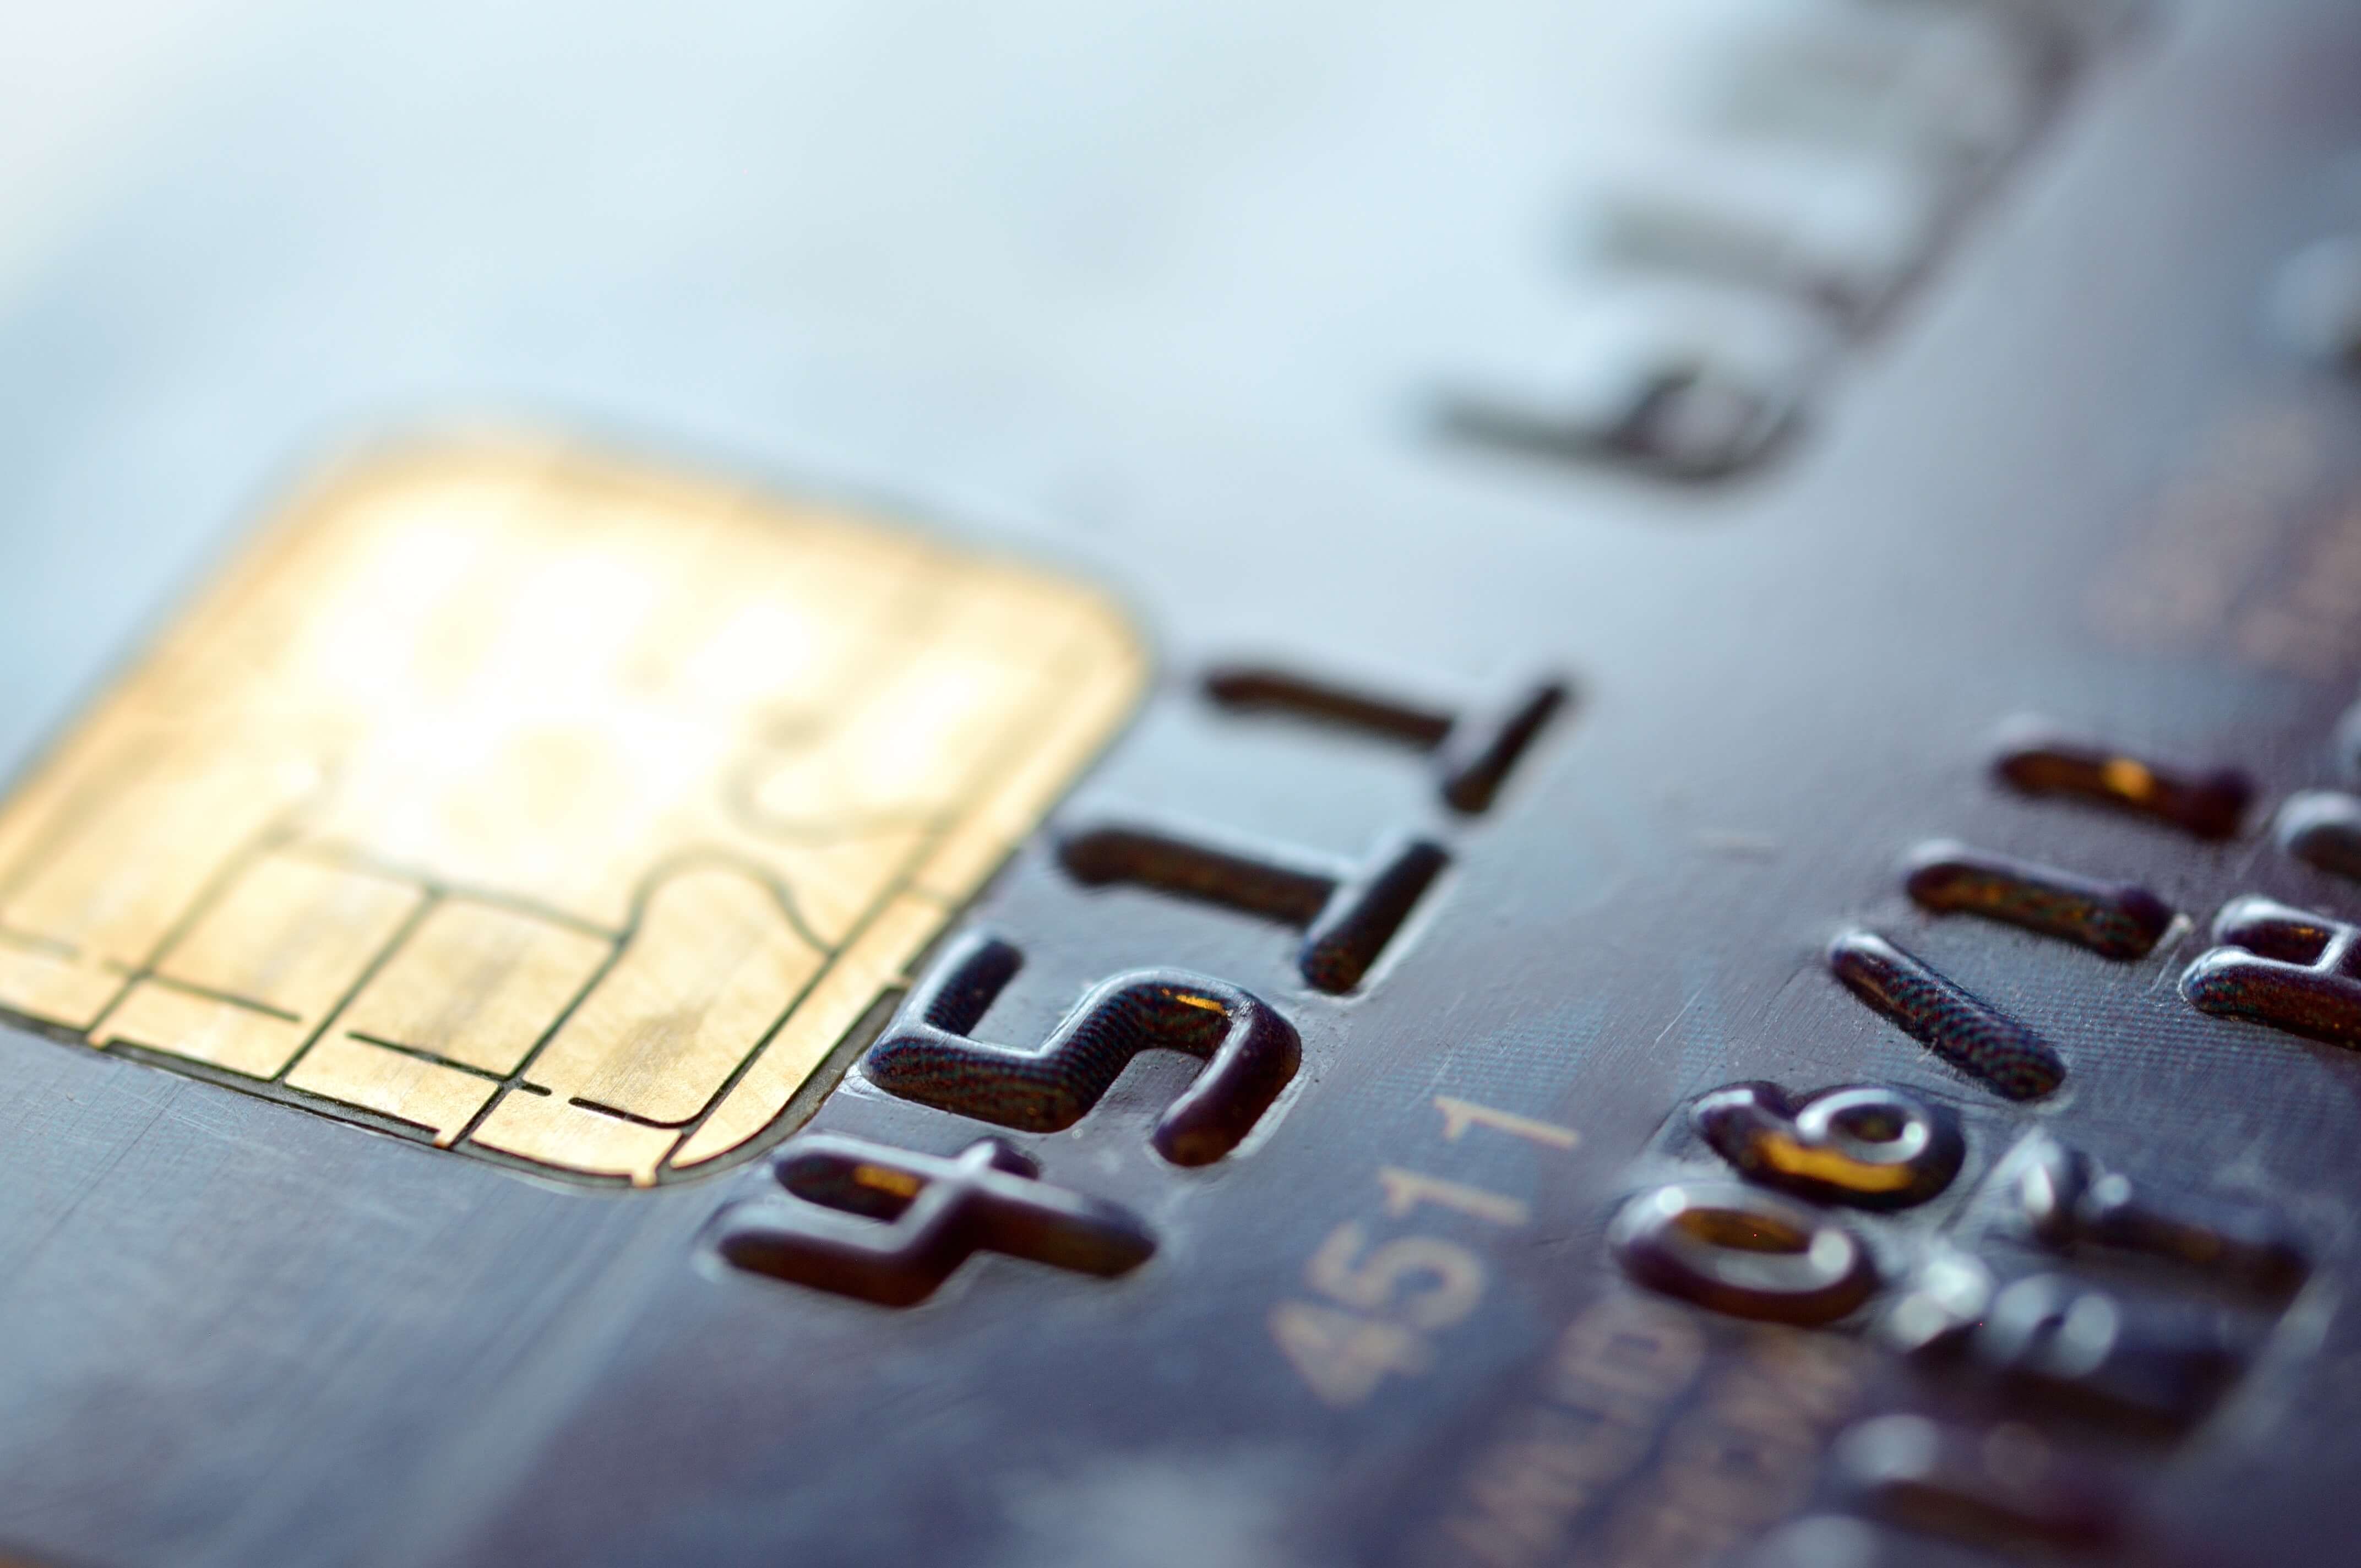 Identity fraud continues to plague the banking industry.